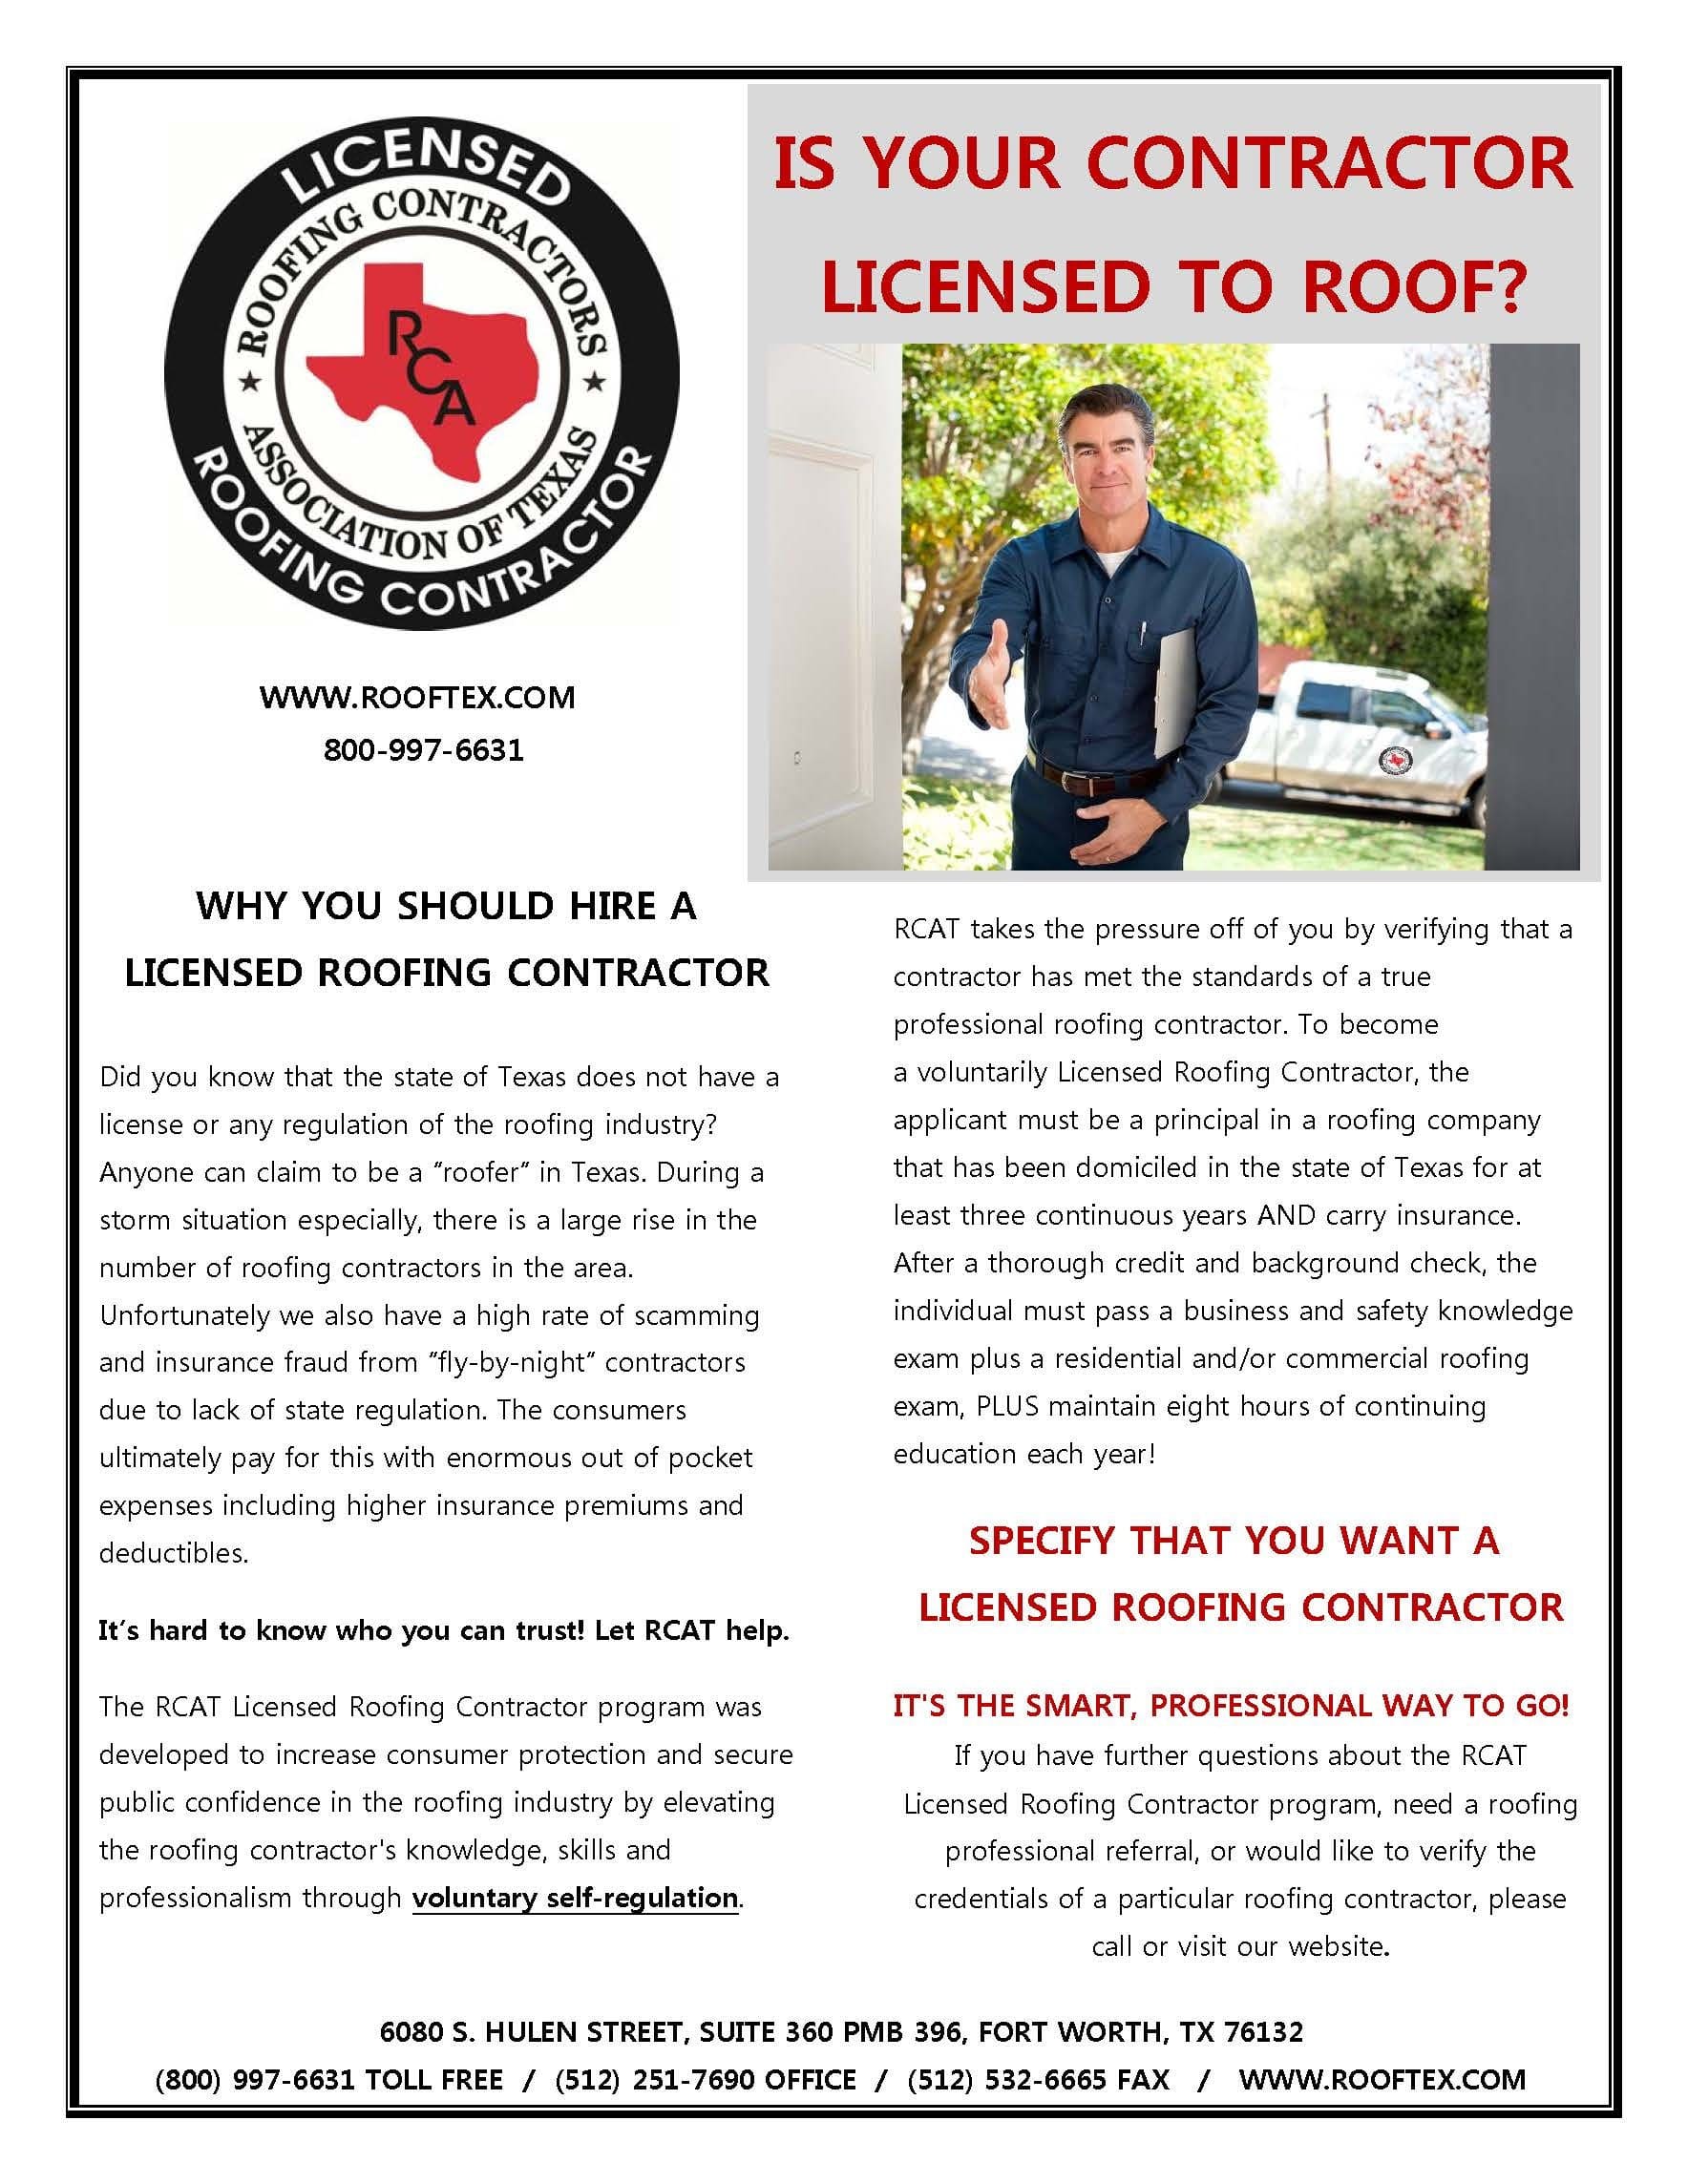 RCAT - Why You Should Hire A Licensed Roofing Contractor